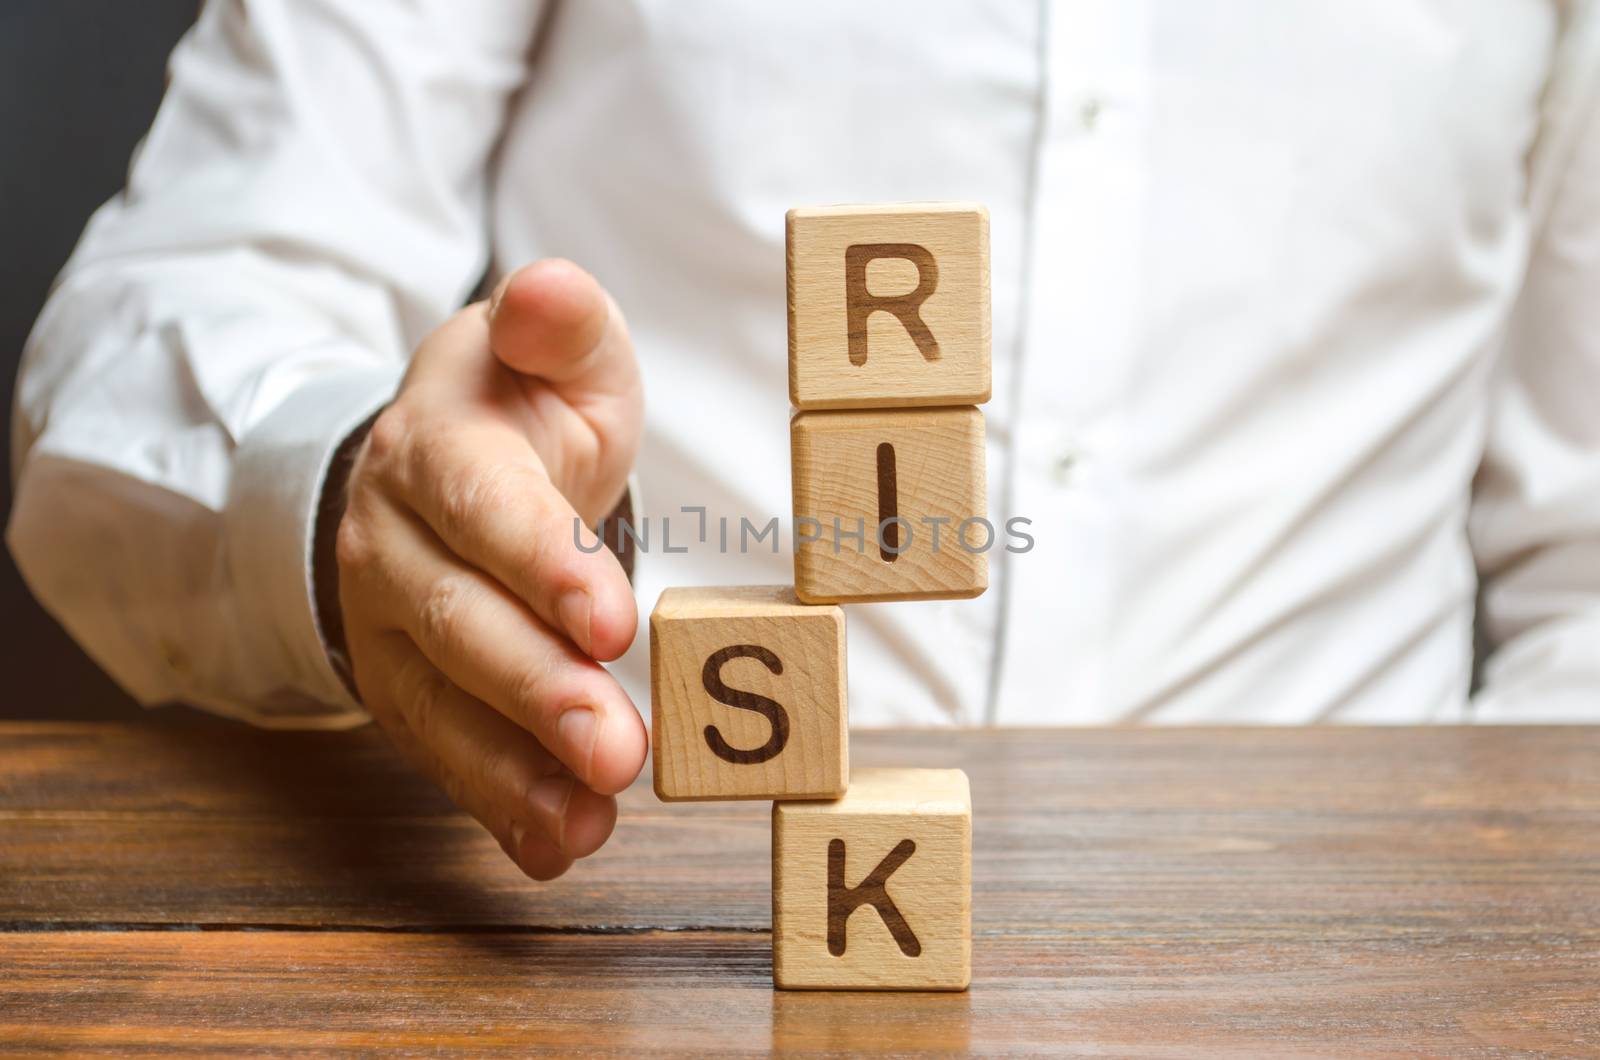 A man straightens a segment in an unstable tower of cubes labeled Risk. Risk management, cost assessment, and business and investment safety. Strengthen business resilience and flexibility.